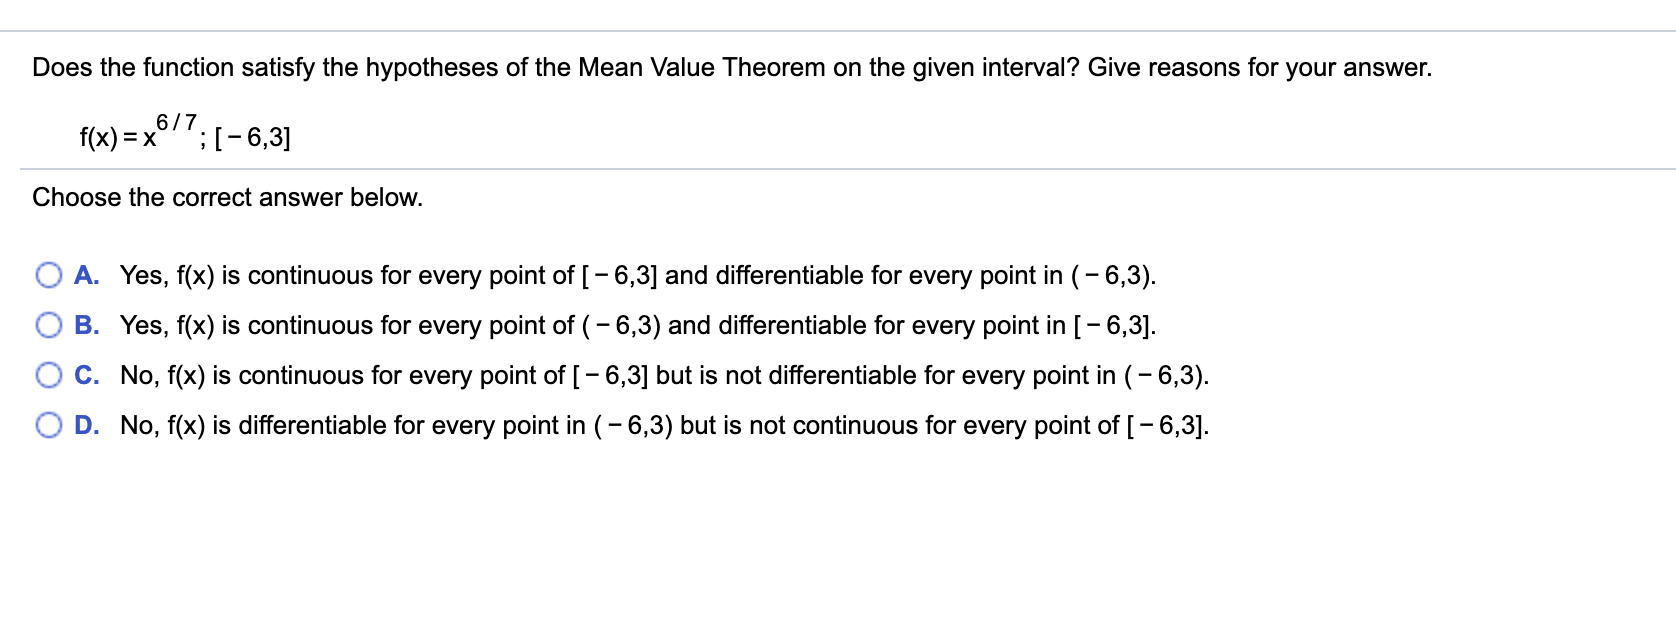 Does the function satisfy the hypotheses of the Mean Value Theorem on the given interval? Give reasons for your answer.
f(x) = x
6/7
;[- 6,3]
Choose the correct answer below.
A. Yes, f(x) is continuous for every point of [-6,3] and differentiable for every point in (- 6,3).
B. Yes, f(x) is continuous for every point of (-6,3) and differentiable for every point in [- 6,3].
C. No, f(x) is continuous for every point of [-6,3] but is not differentiable for every point in (- 6,3).
D. No, f(x) is differentiable for every point in (-6,3) but is not continuous for every point of [-6,3].
